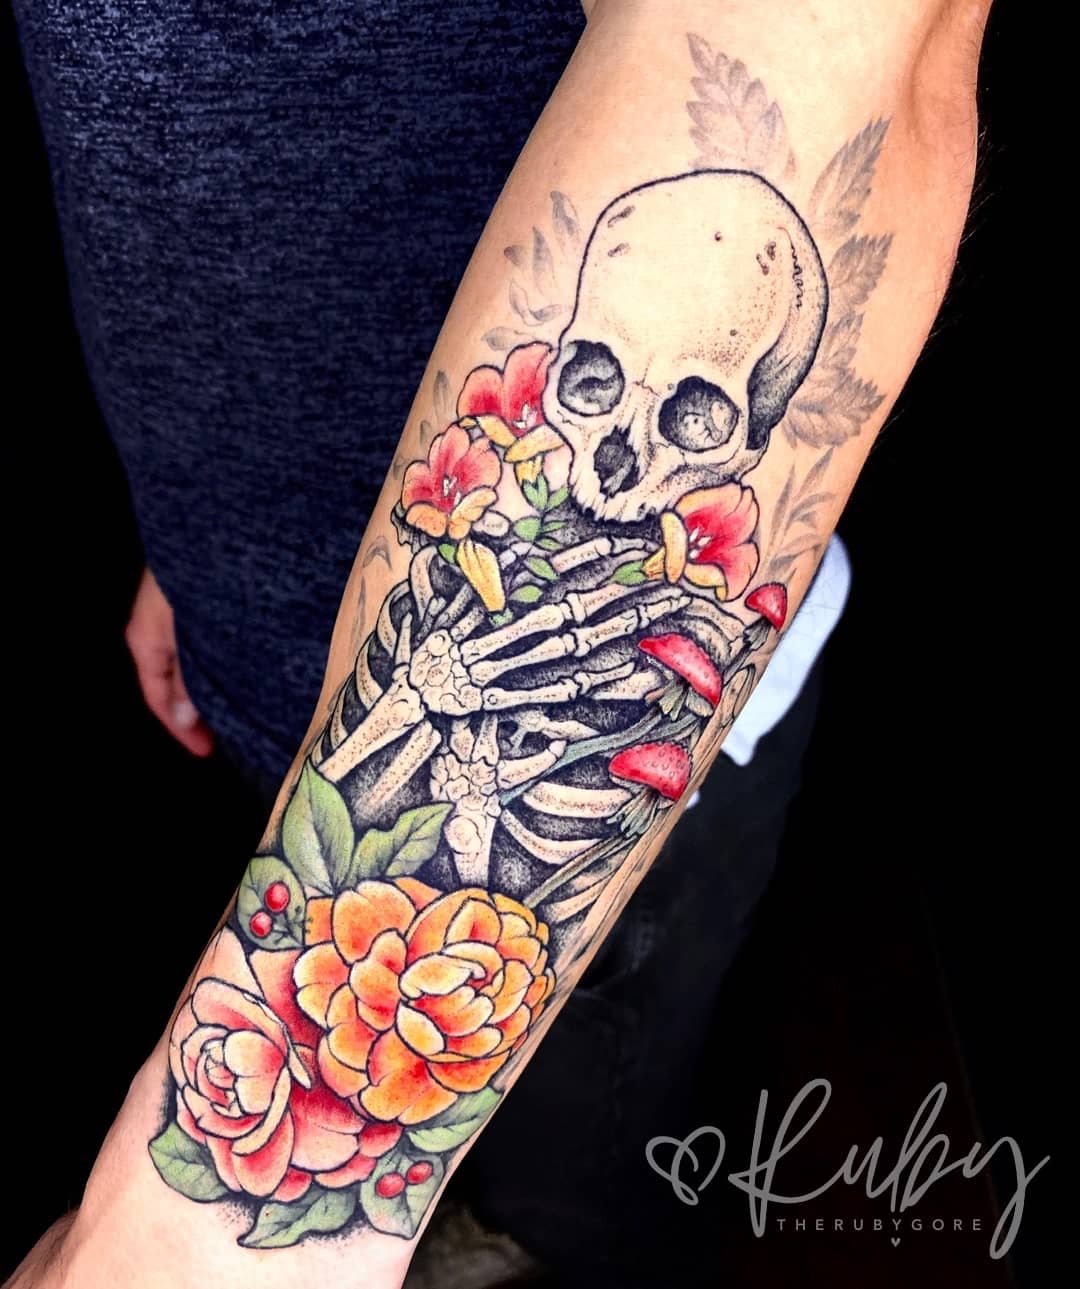 Tattoo Design Request hey all looking for a skeleton kneeling down picking  flowers with flowers and vines growing on the bones TIA some inspiration  below  rTattooDesigns